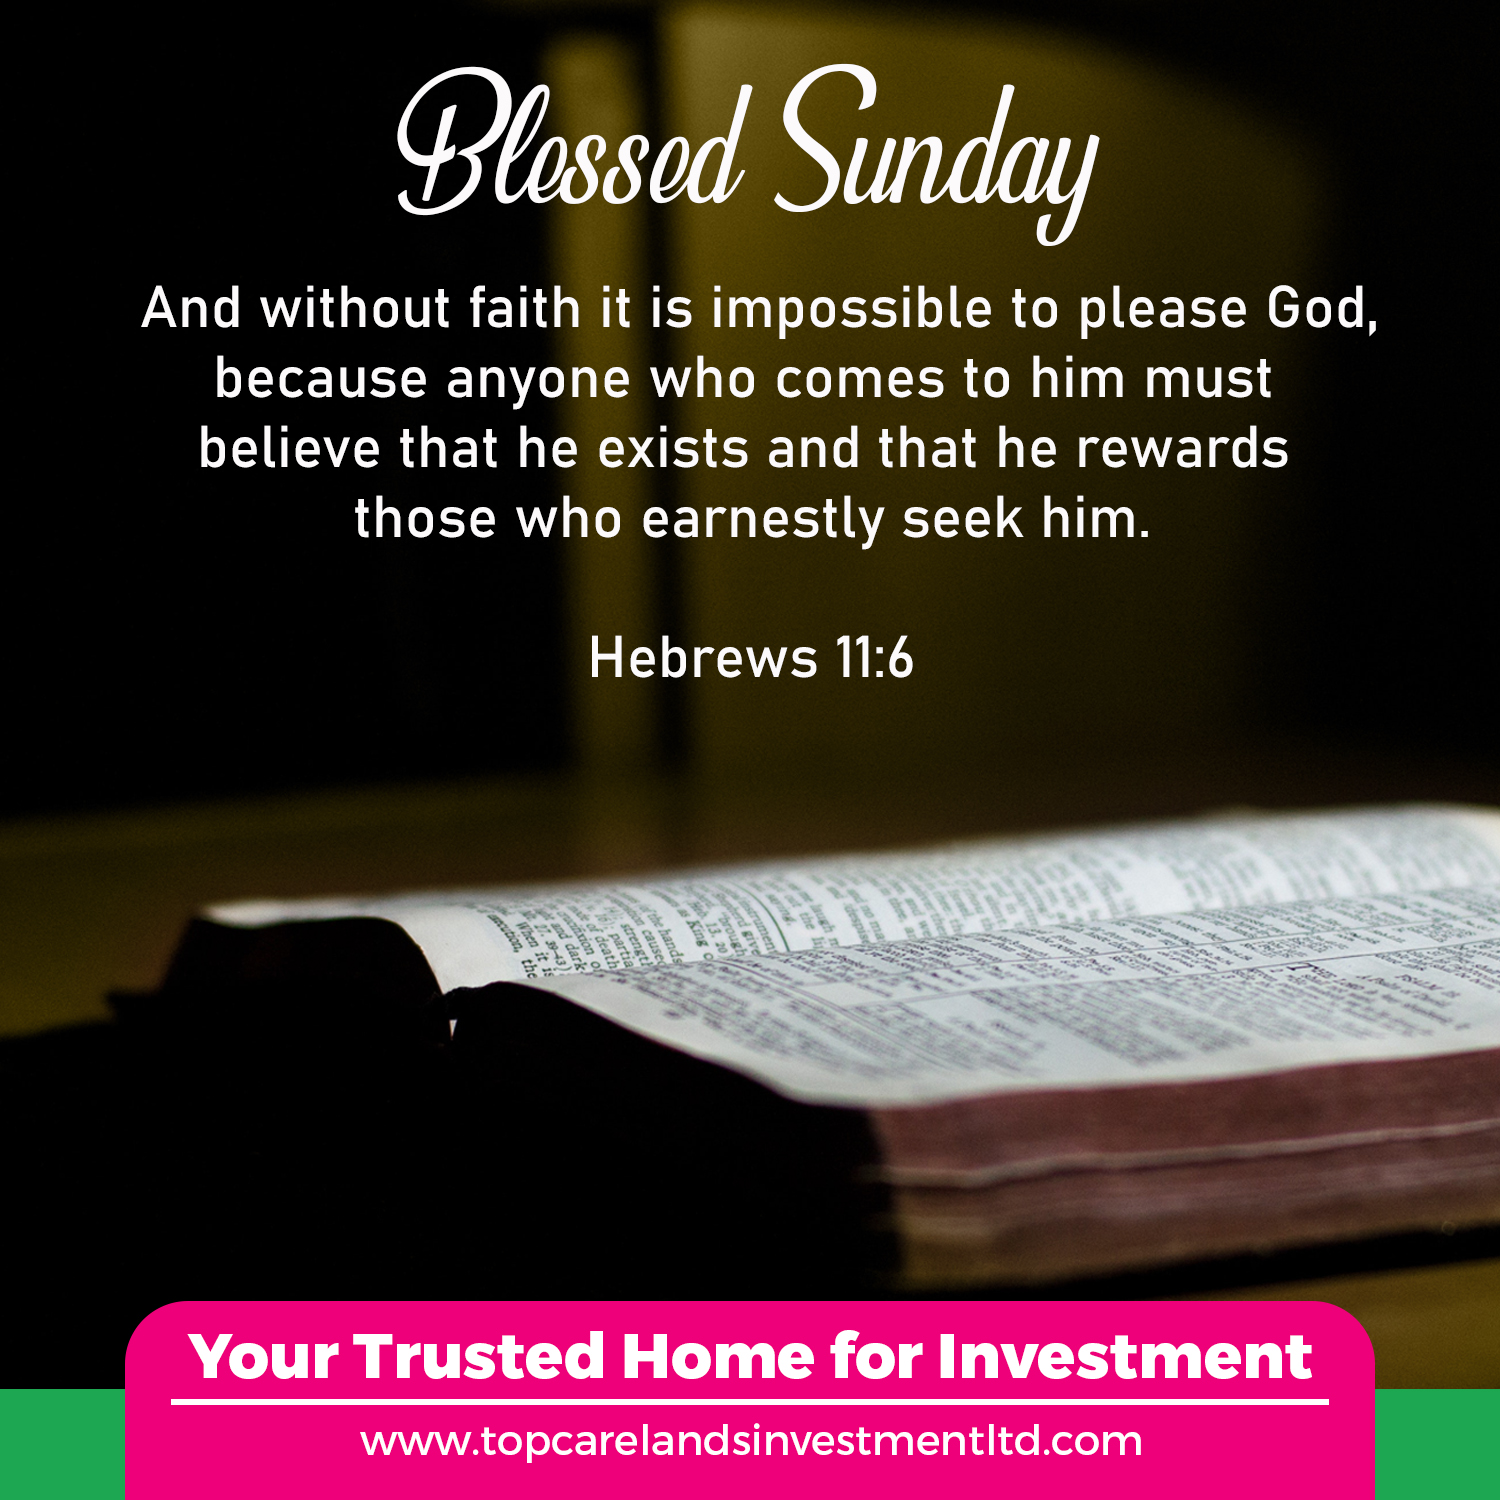 Blessed Sunday – Topcare Lands